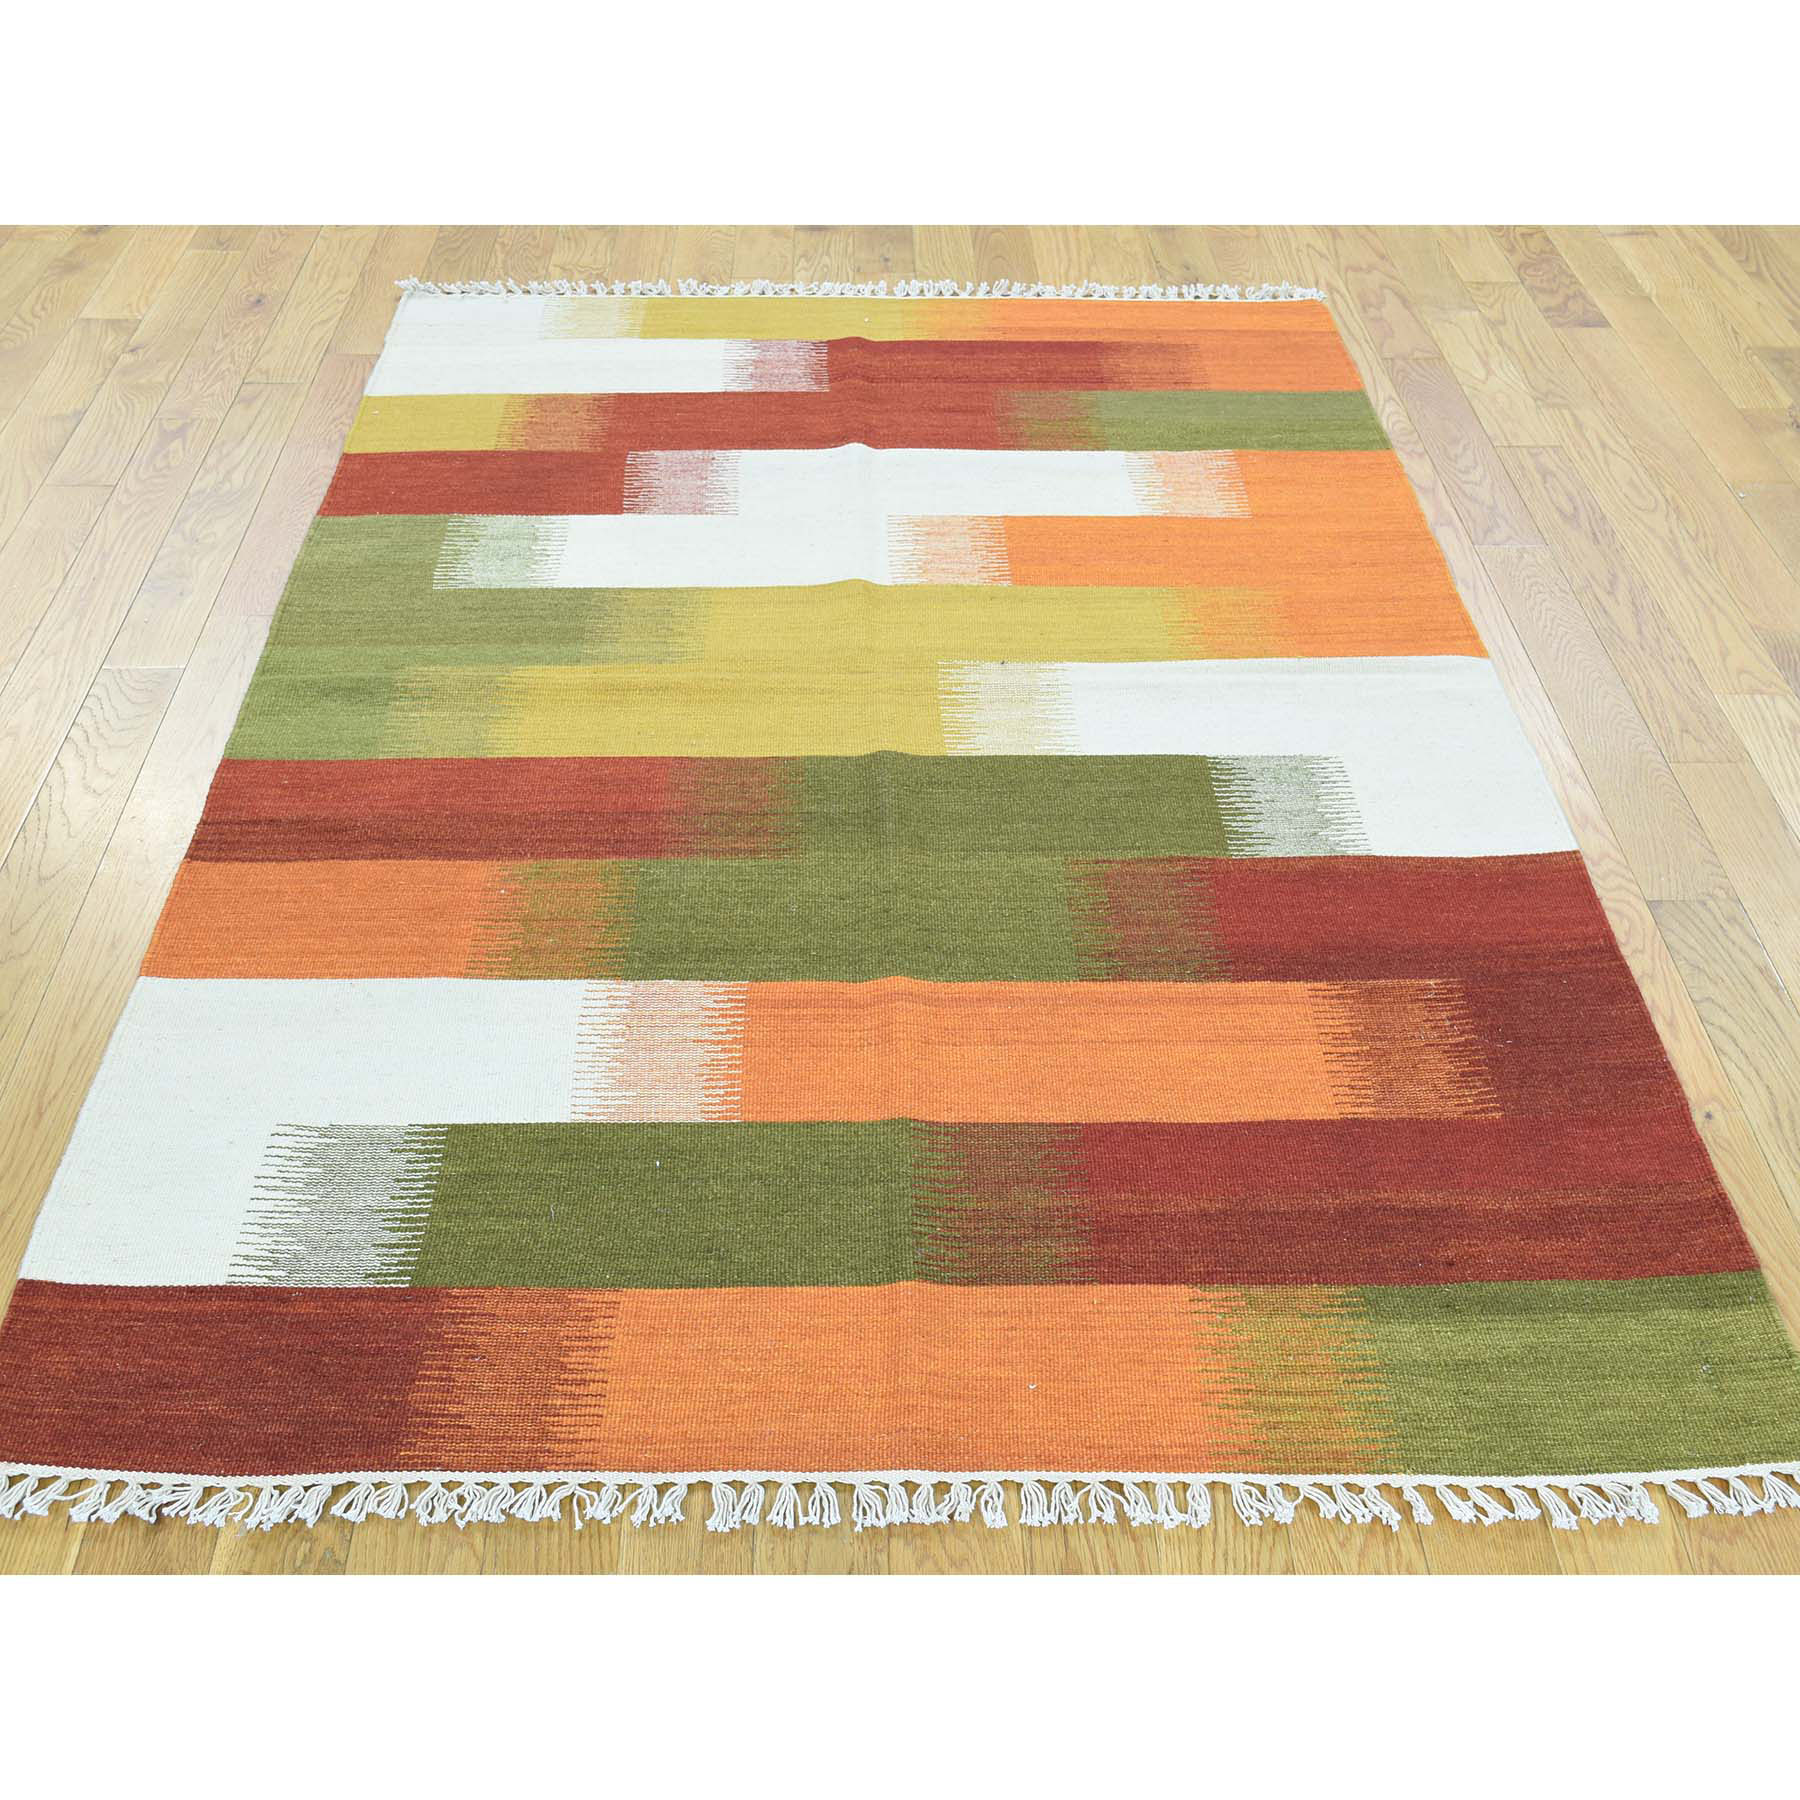 4-x6-2  Hand-Woven Durie Kilim 100 Percent Wool Flat Weave Colorful Rug 